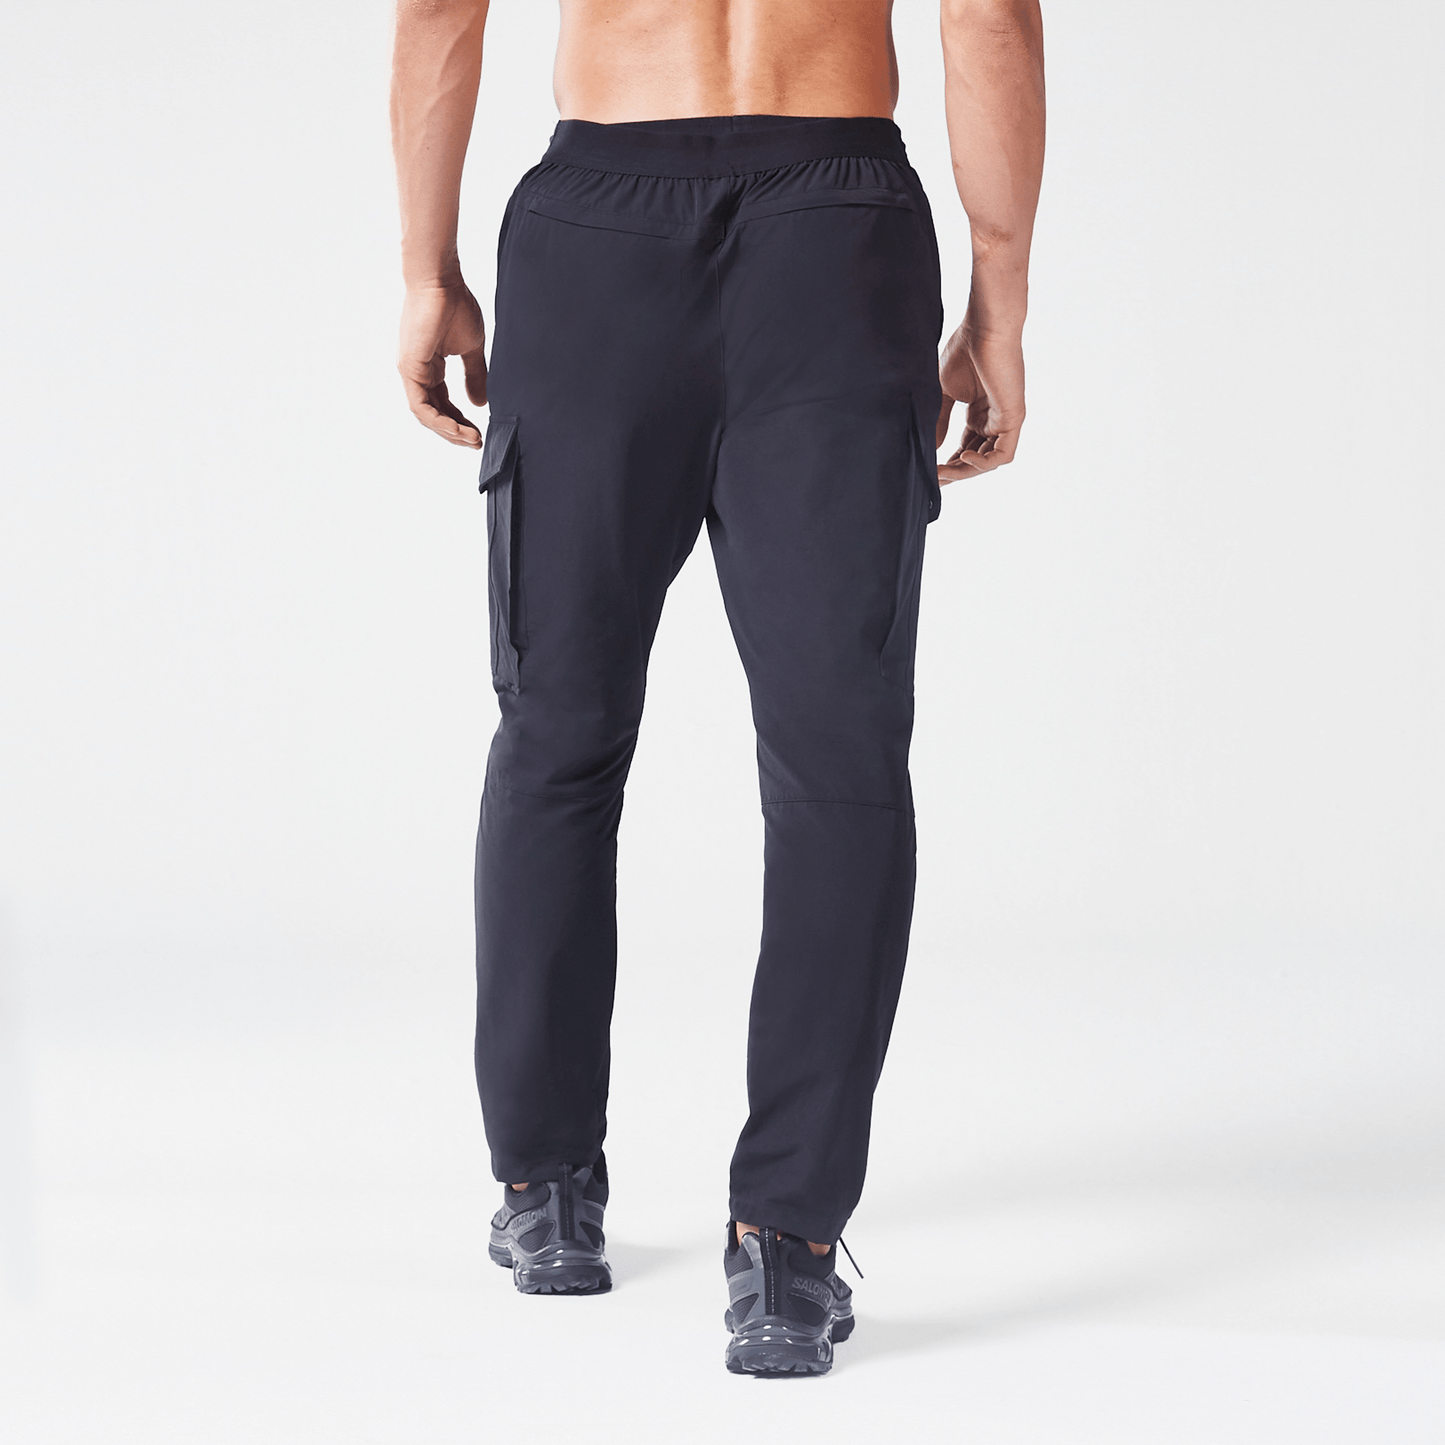 AE | Code Tapered Cargo Pants - Black | SQUATWOLF